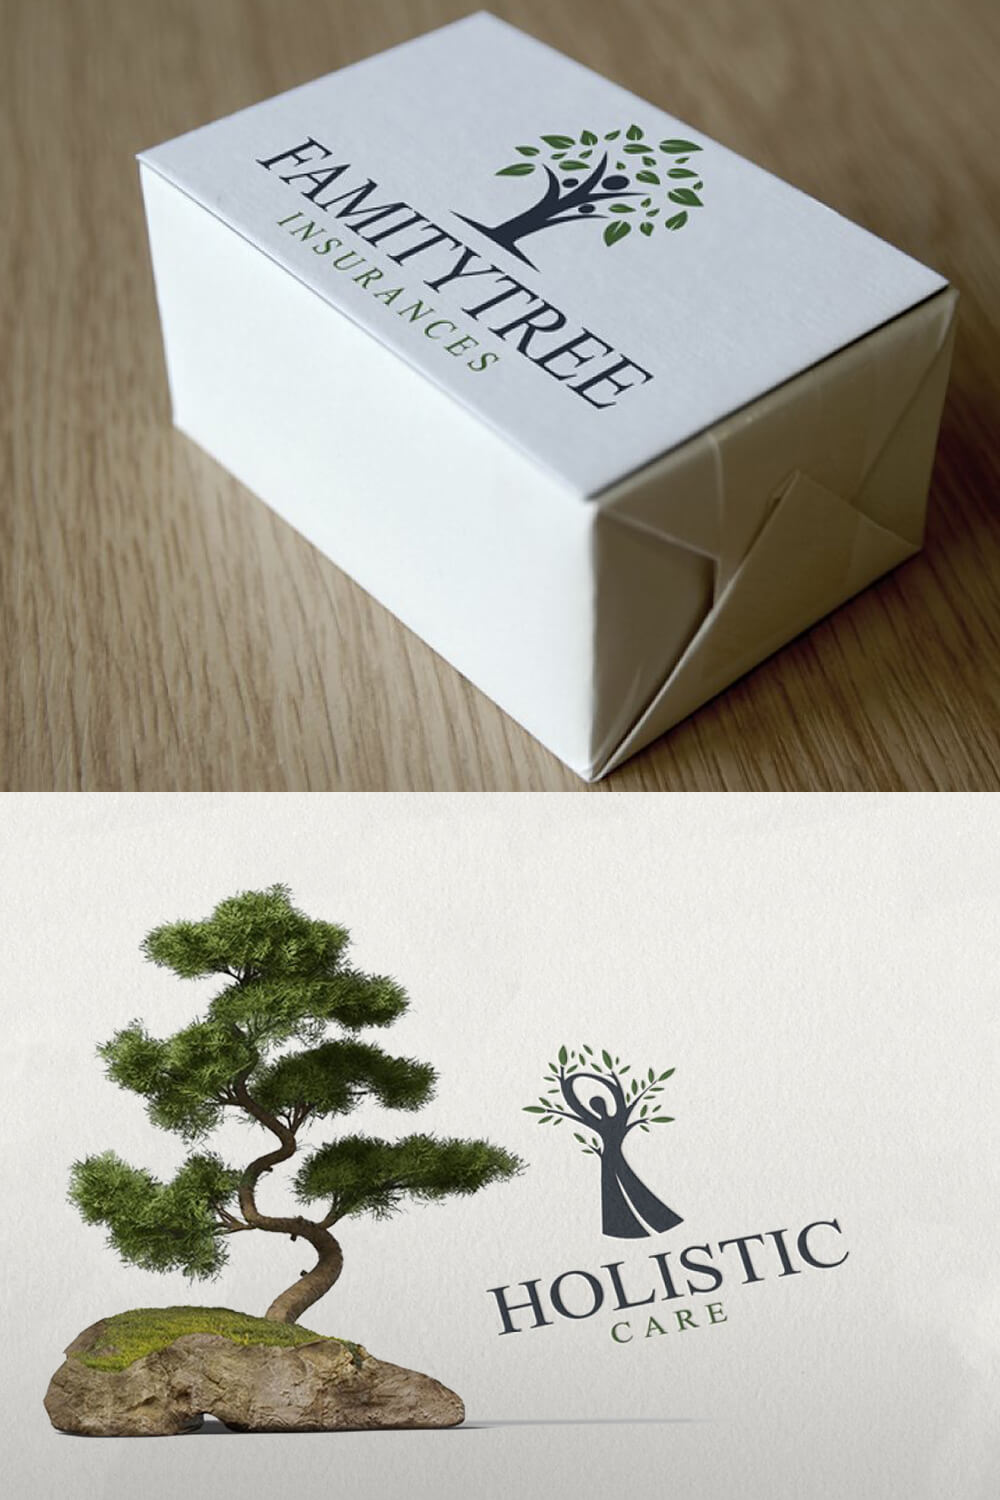 A small box with inscription "Famitytree insurances".